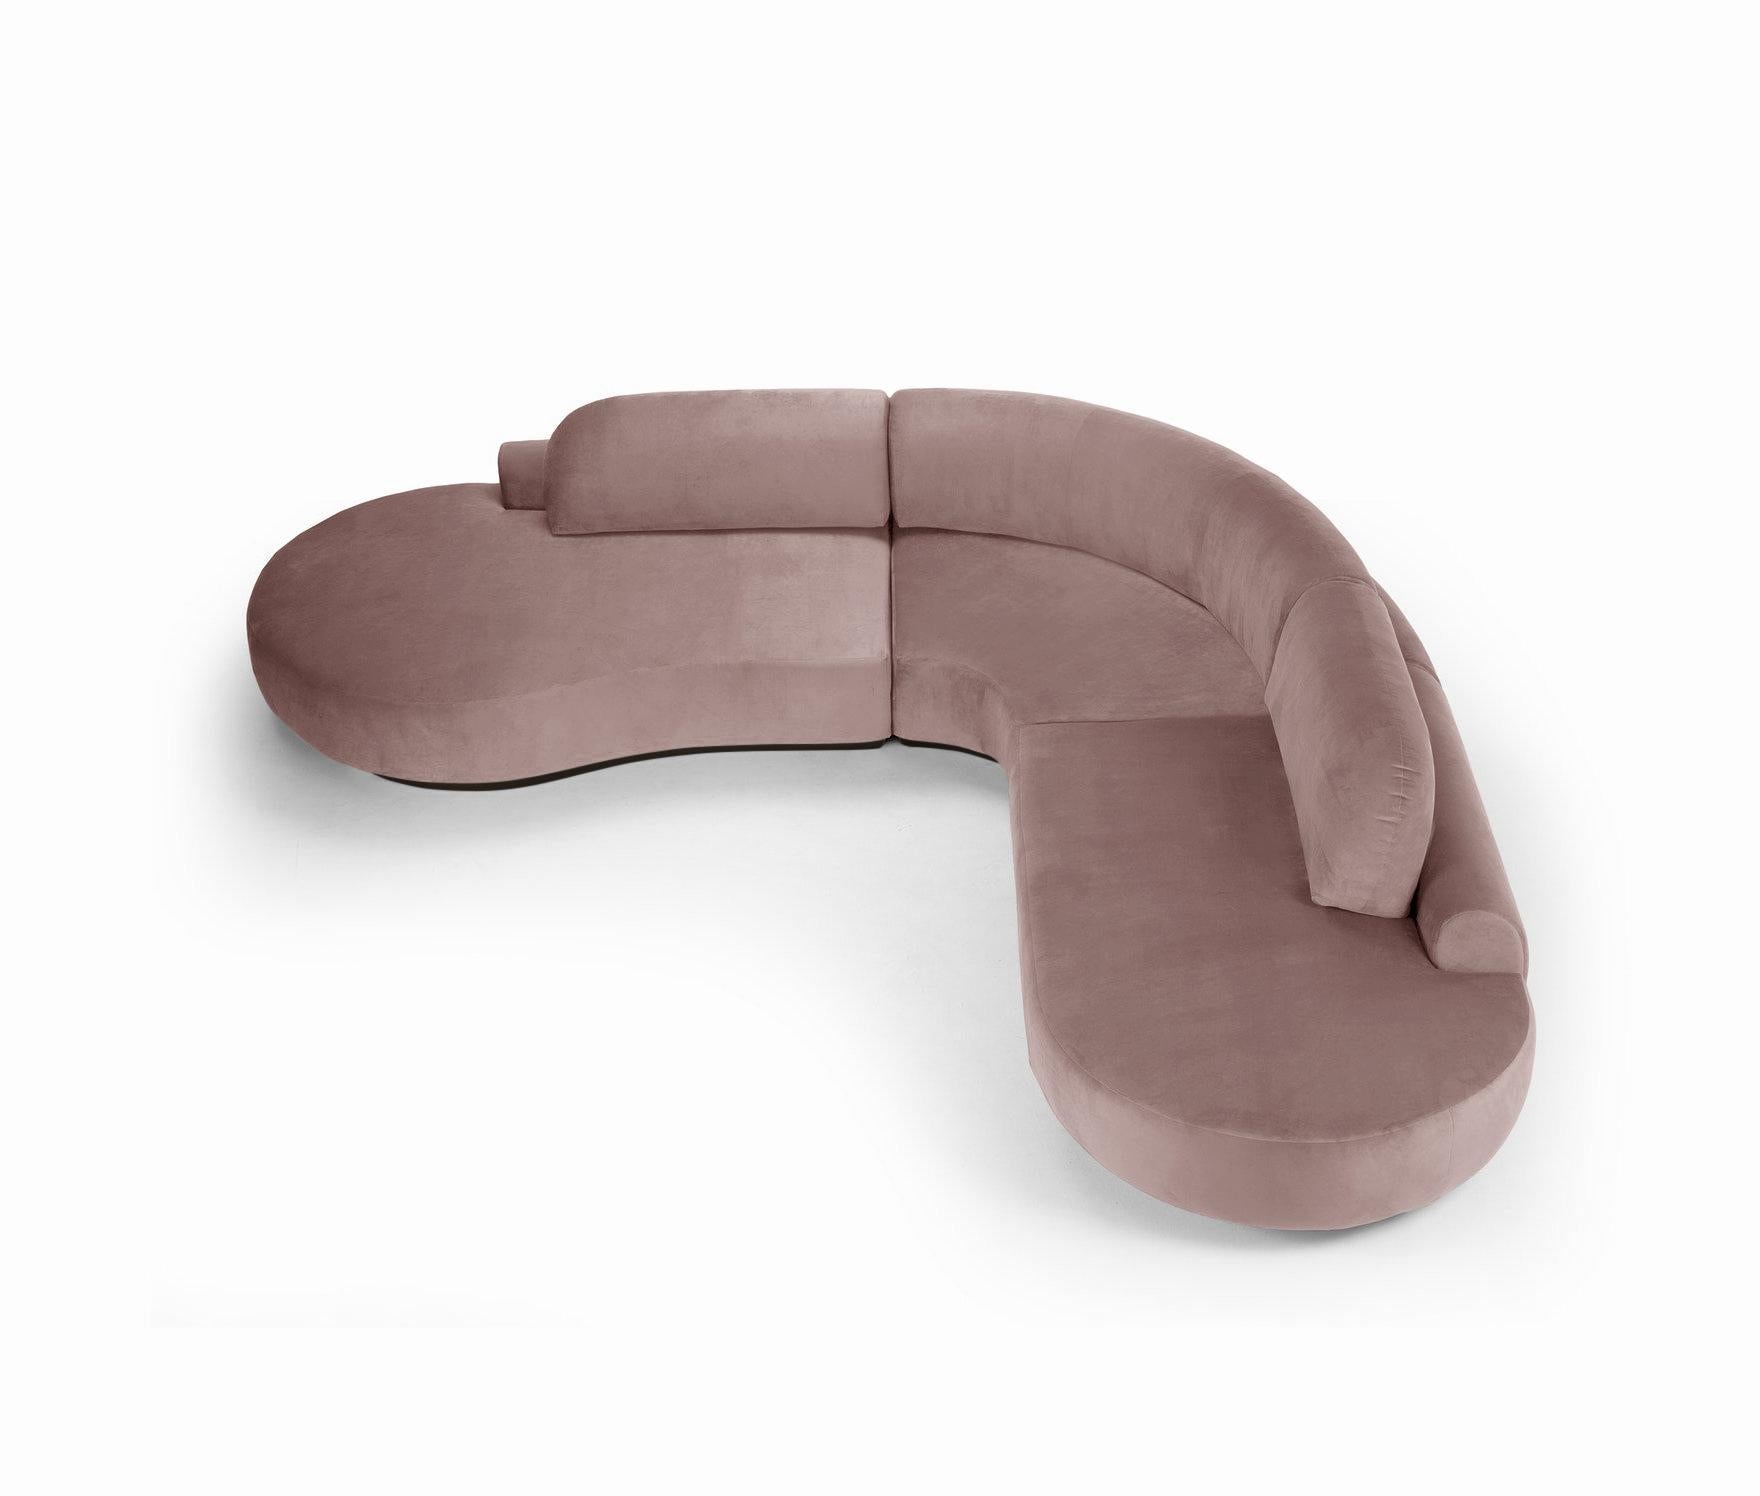 double sided curved sofa